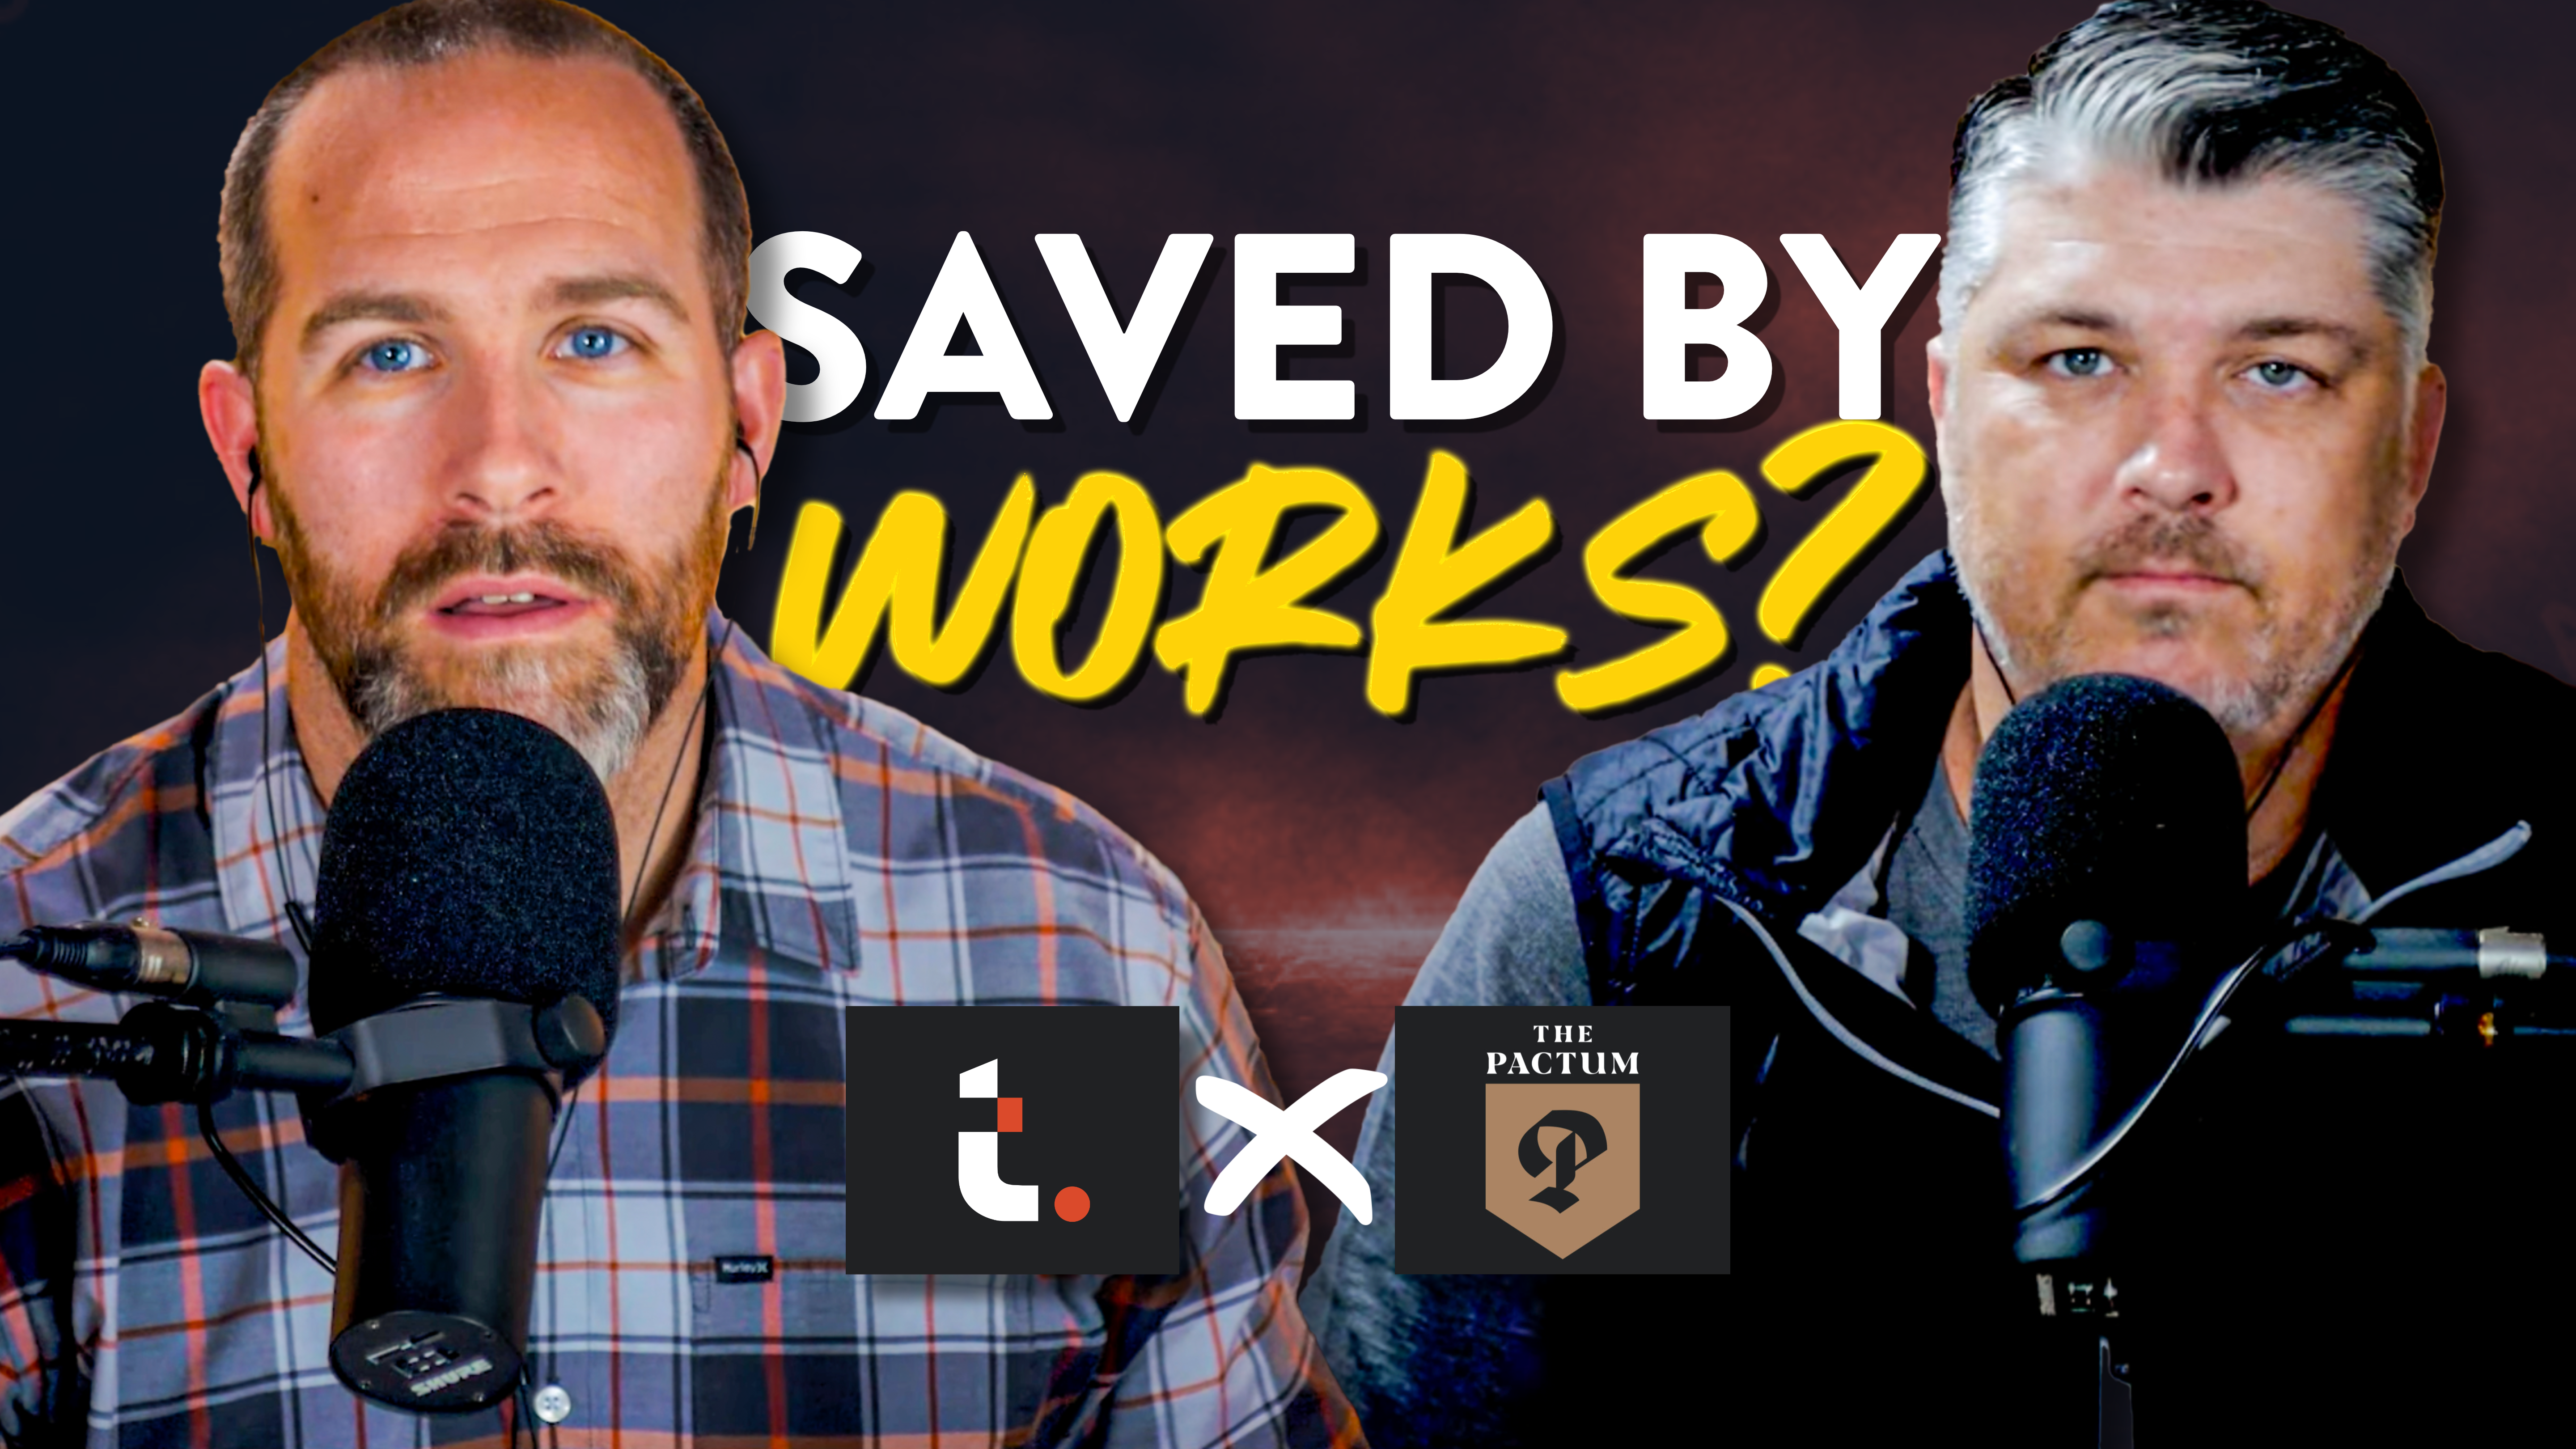 Saved by Works? (w/ The Pactum)